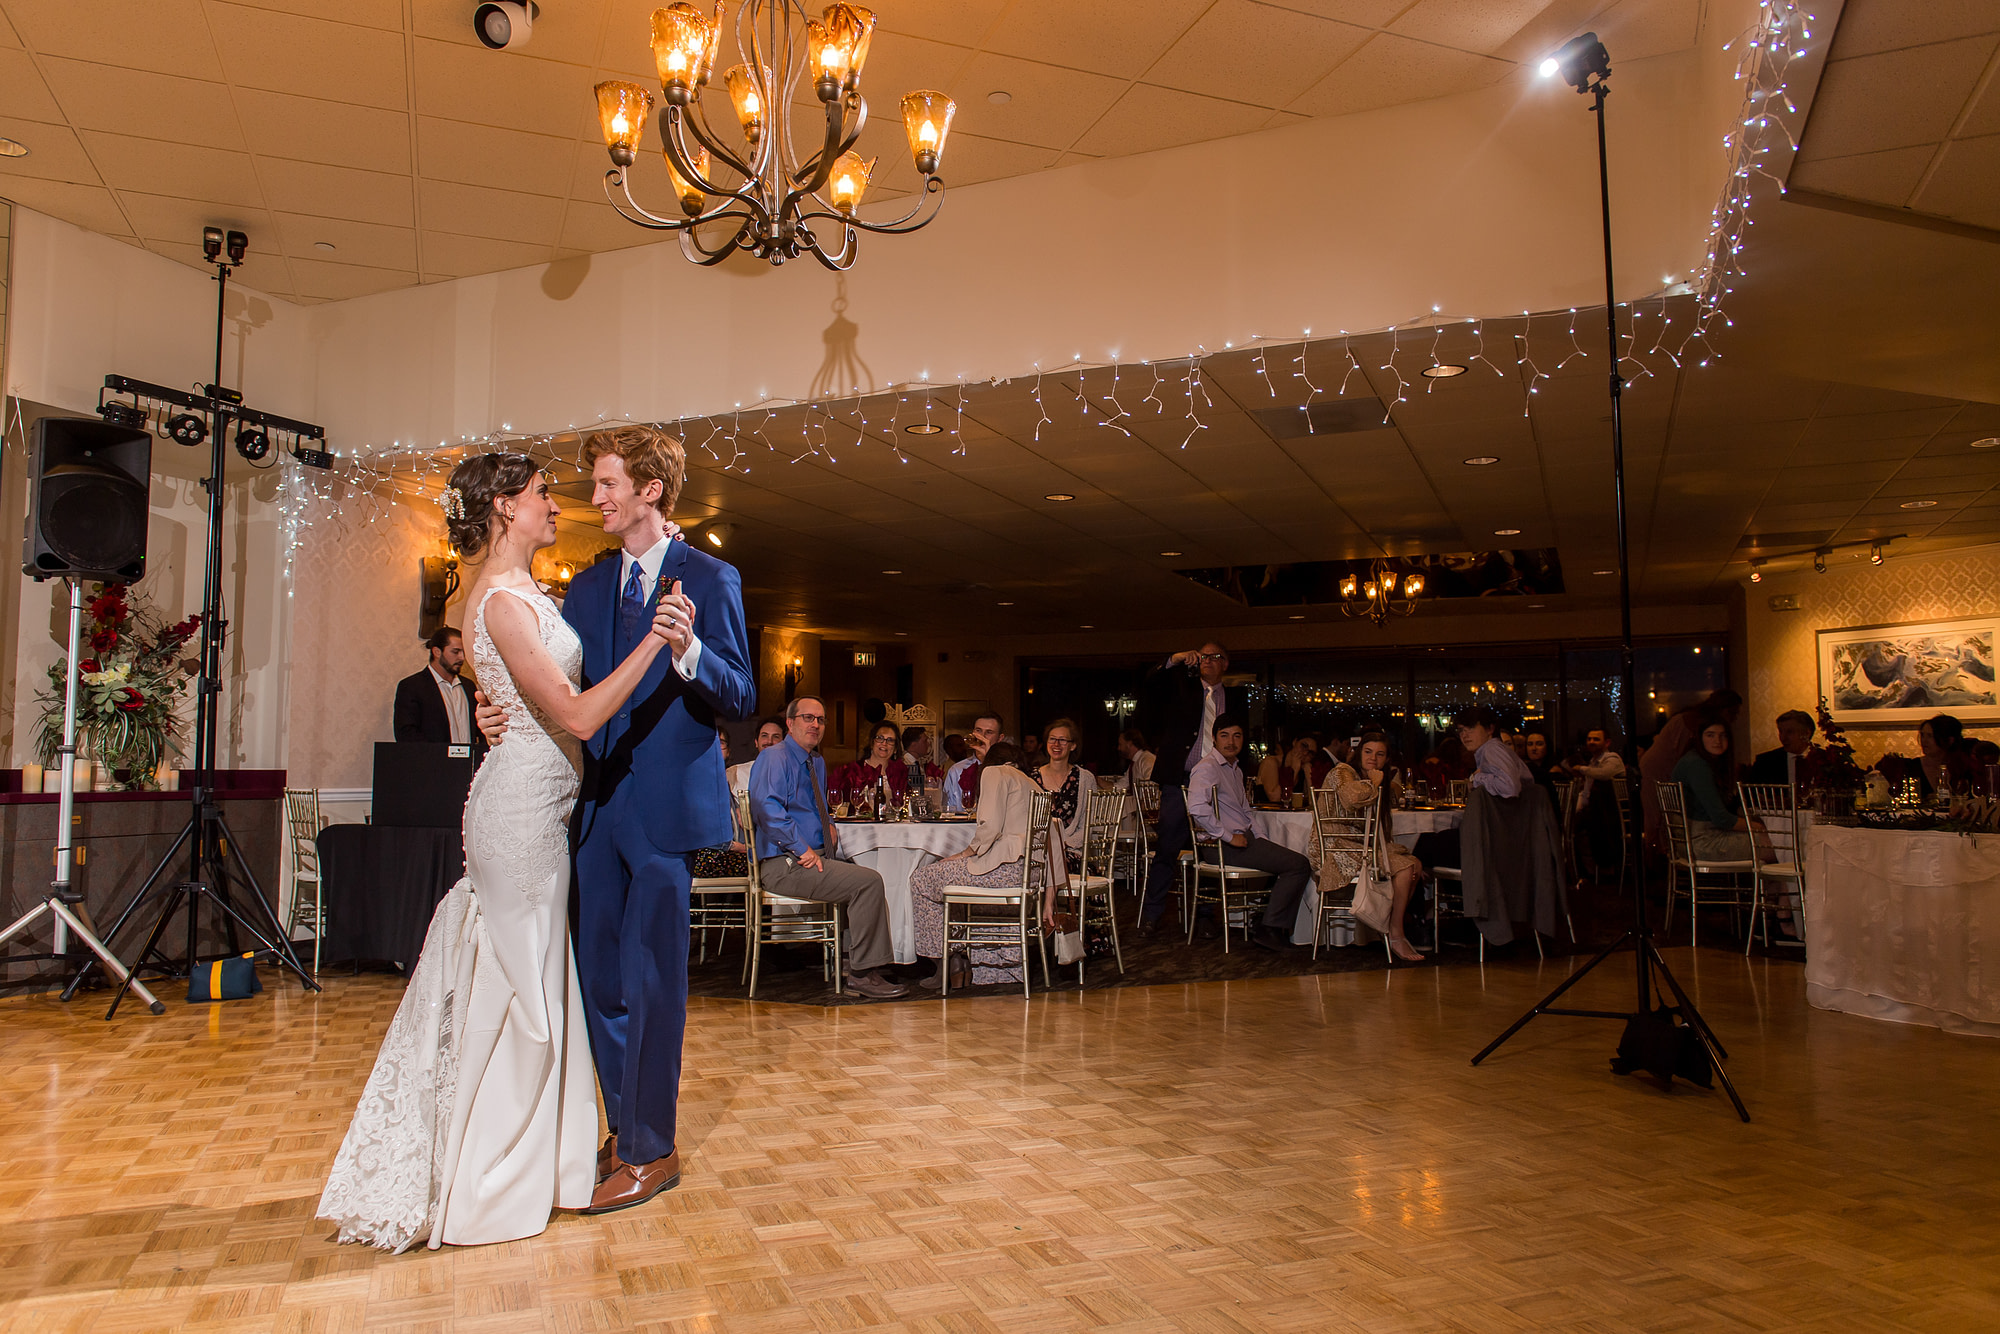 The bride and groom dance at the Franciscan Event Center during their wedding in Centennial, Colorado.